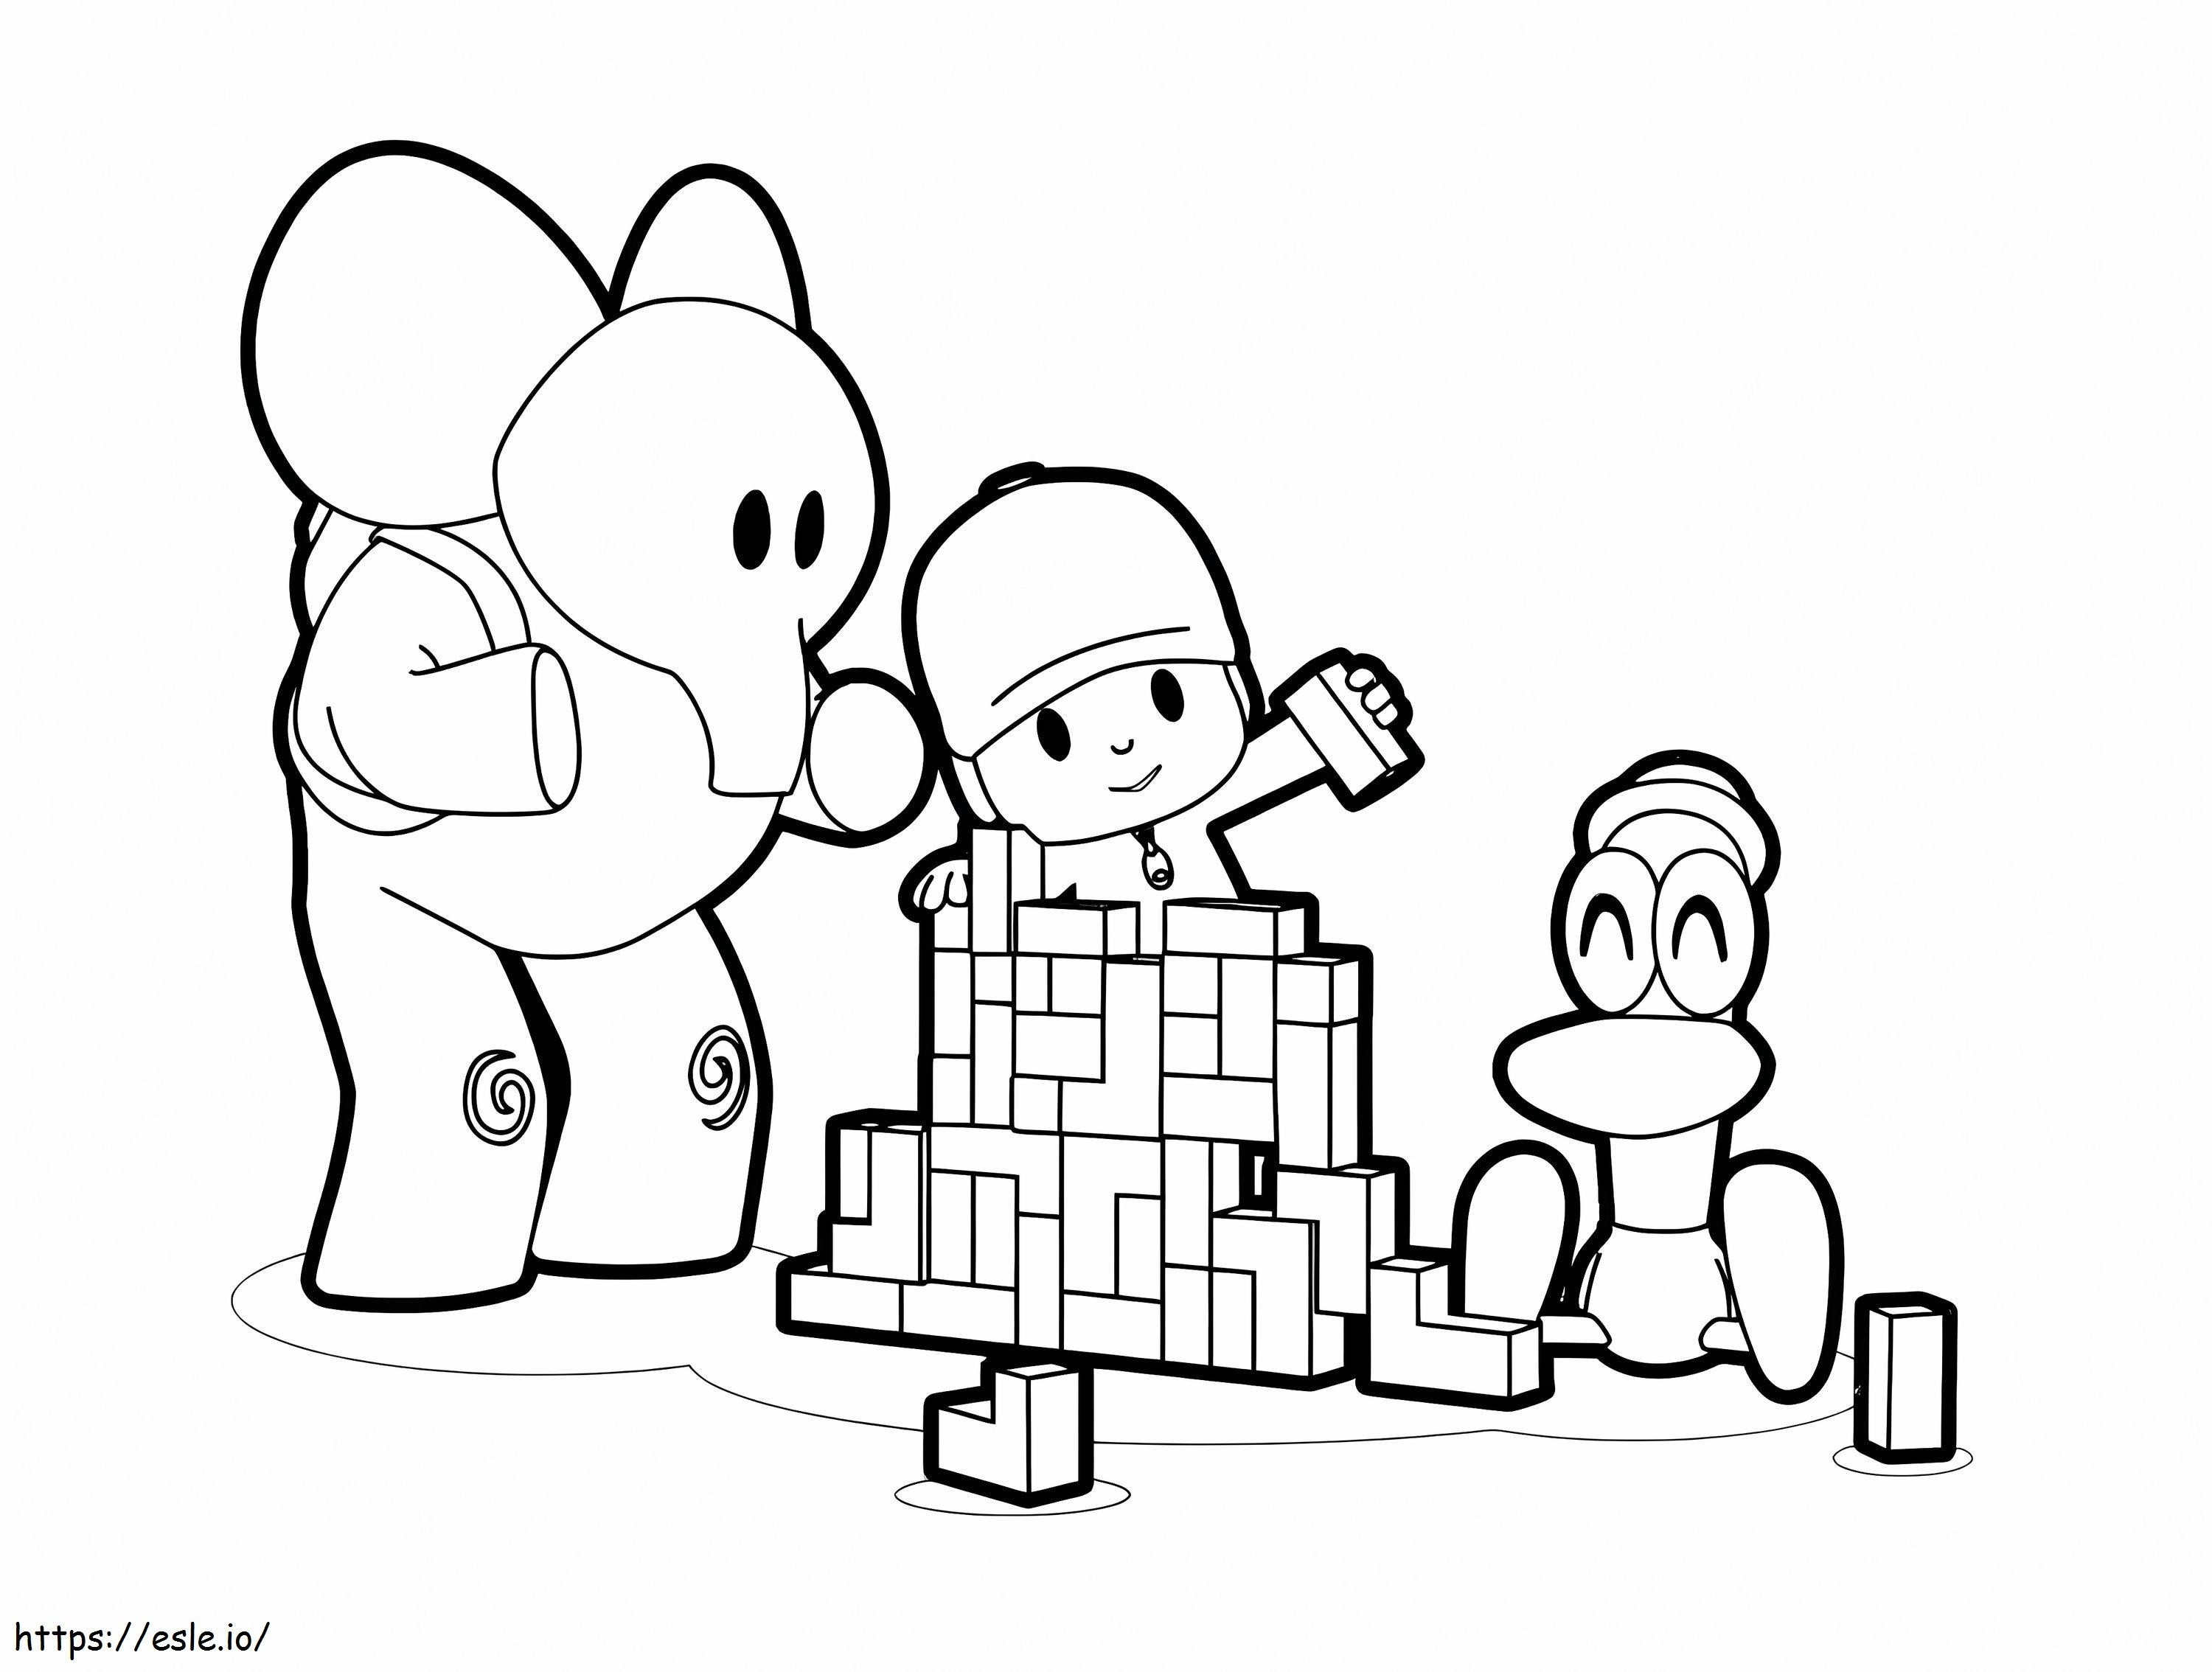 Pocoyo And Friends Playing Lego coloring page